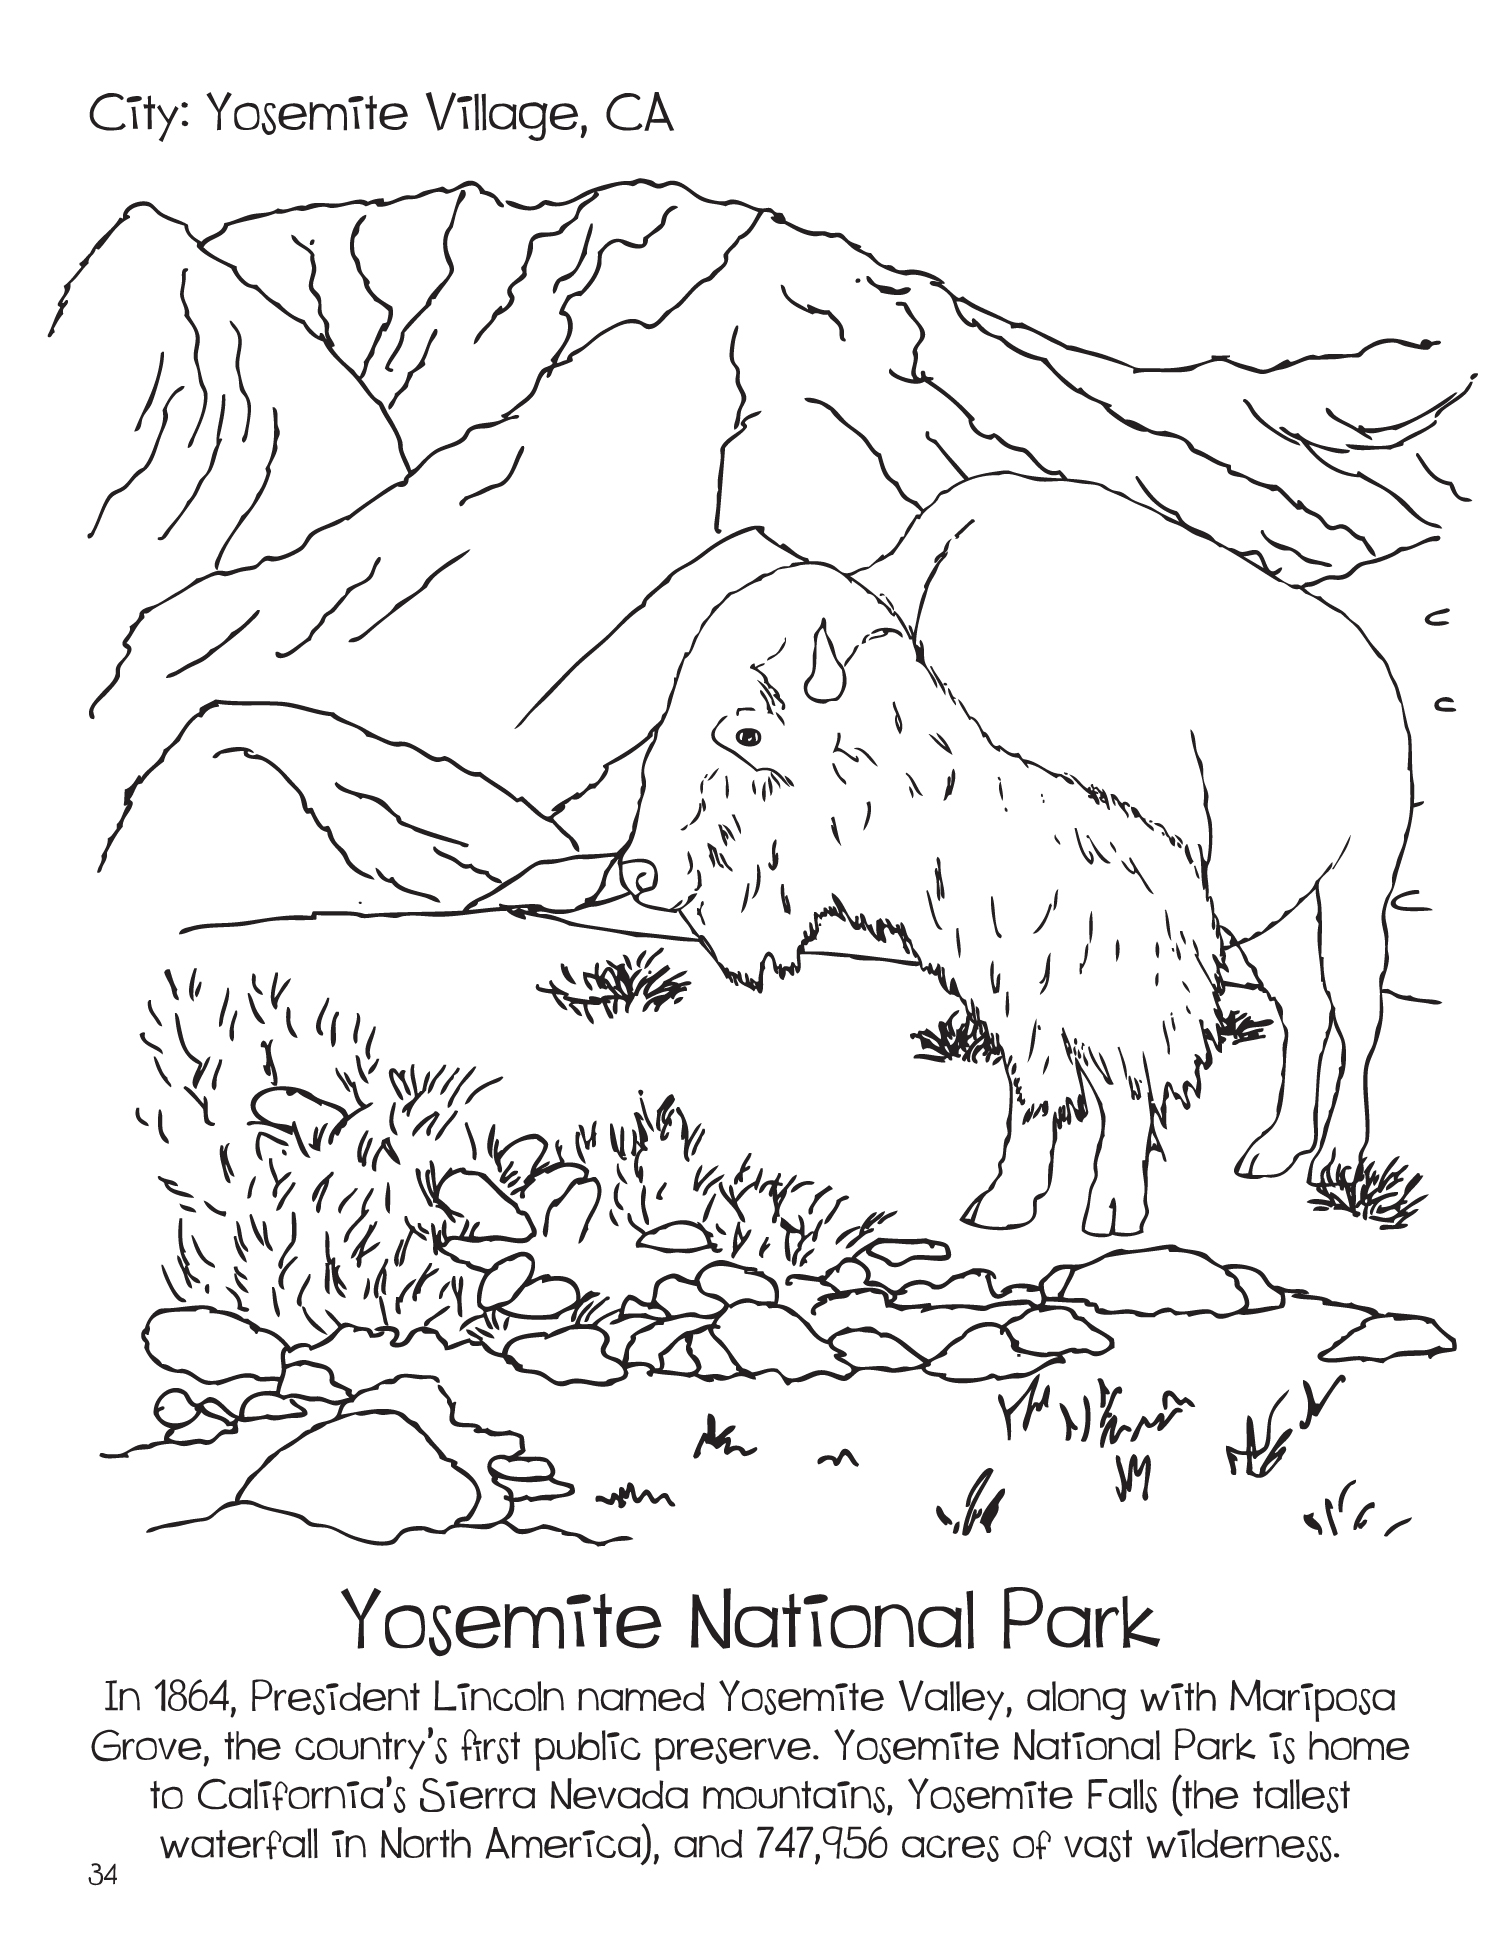 Yosemite National Park Coloring page | Doodles Ave